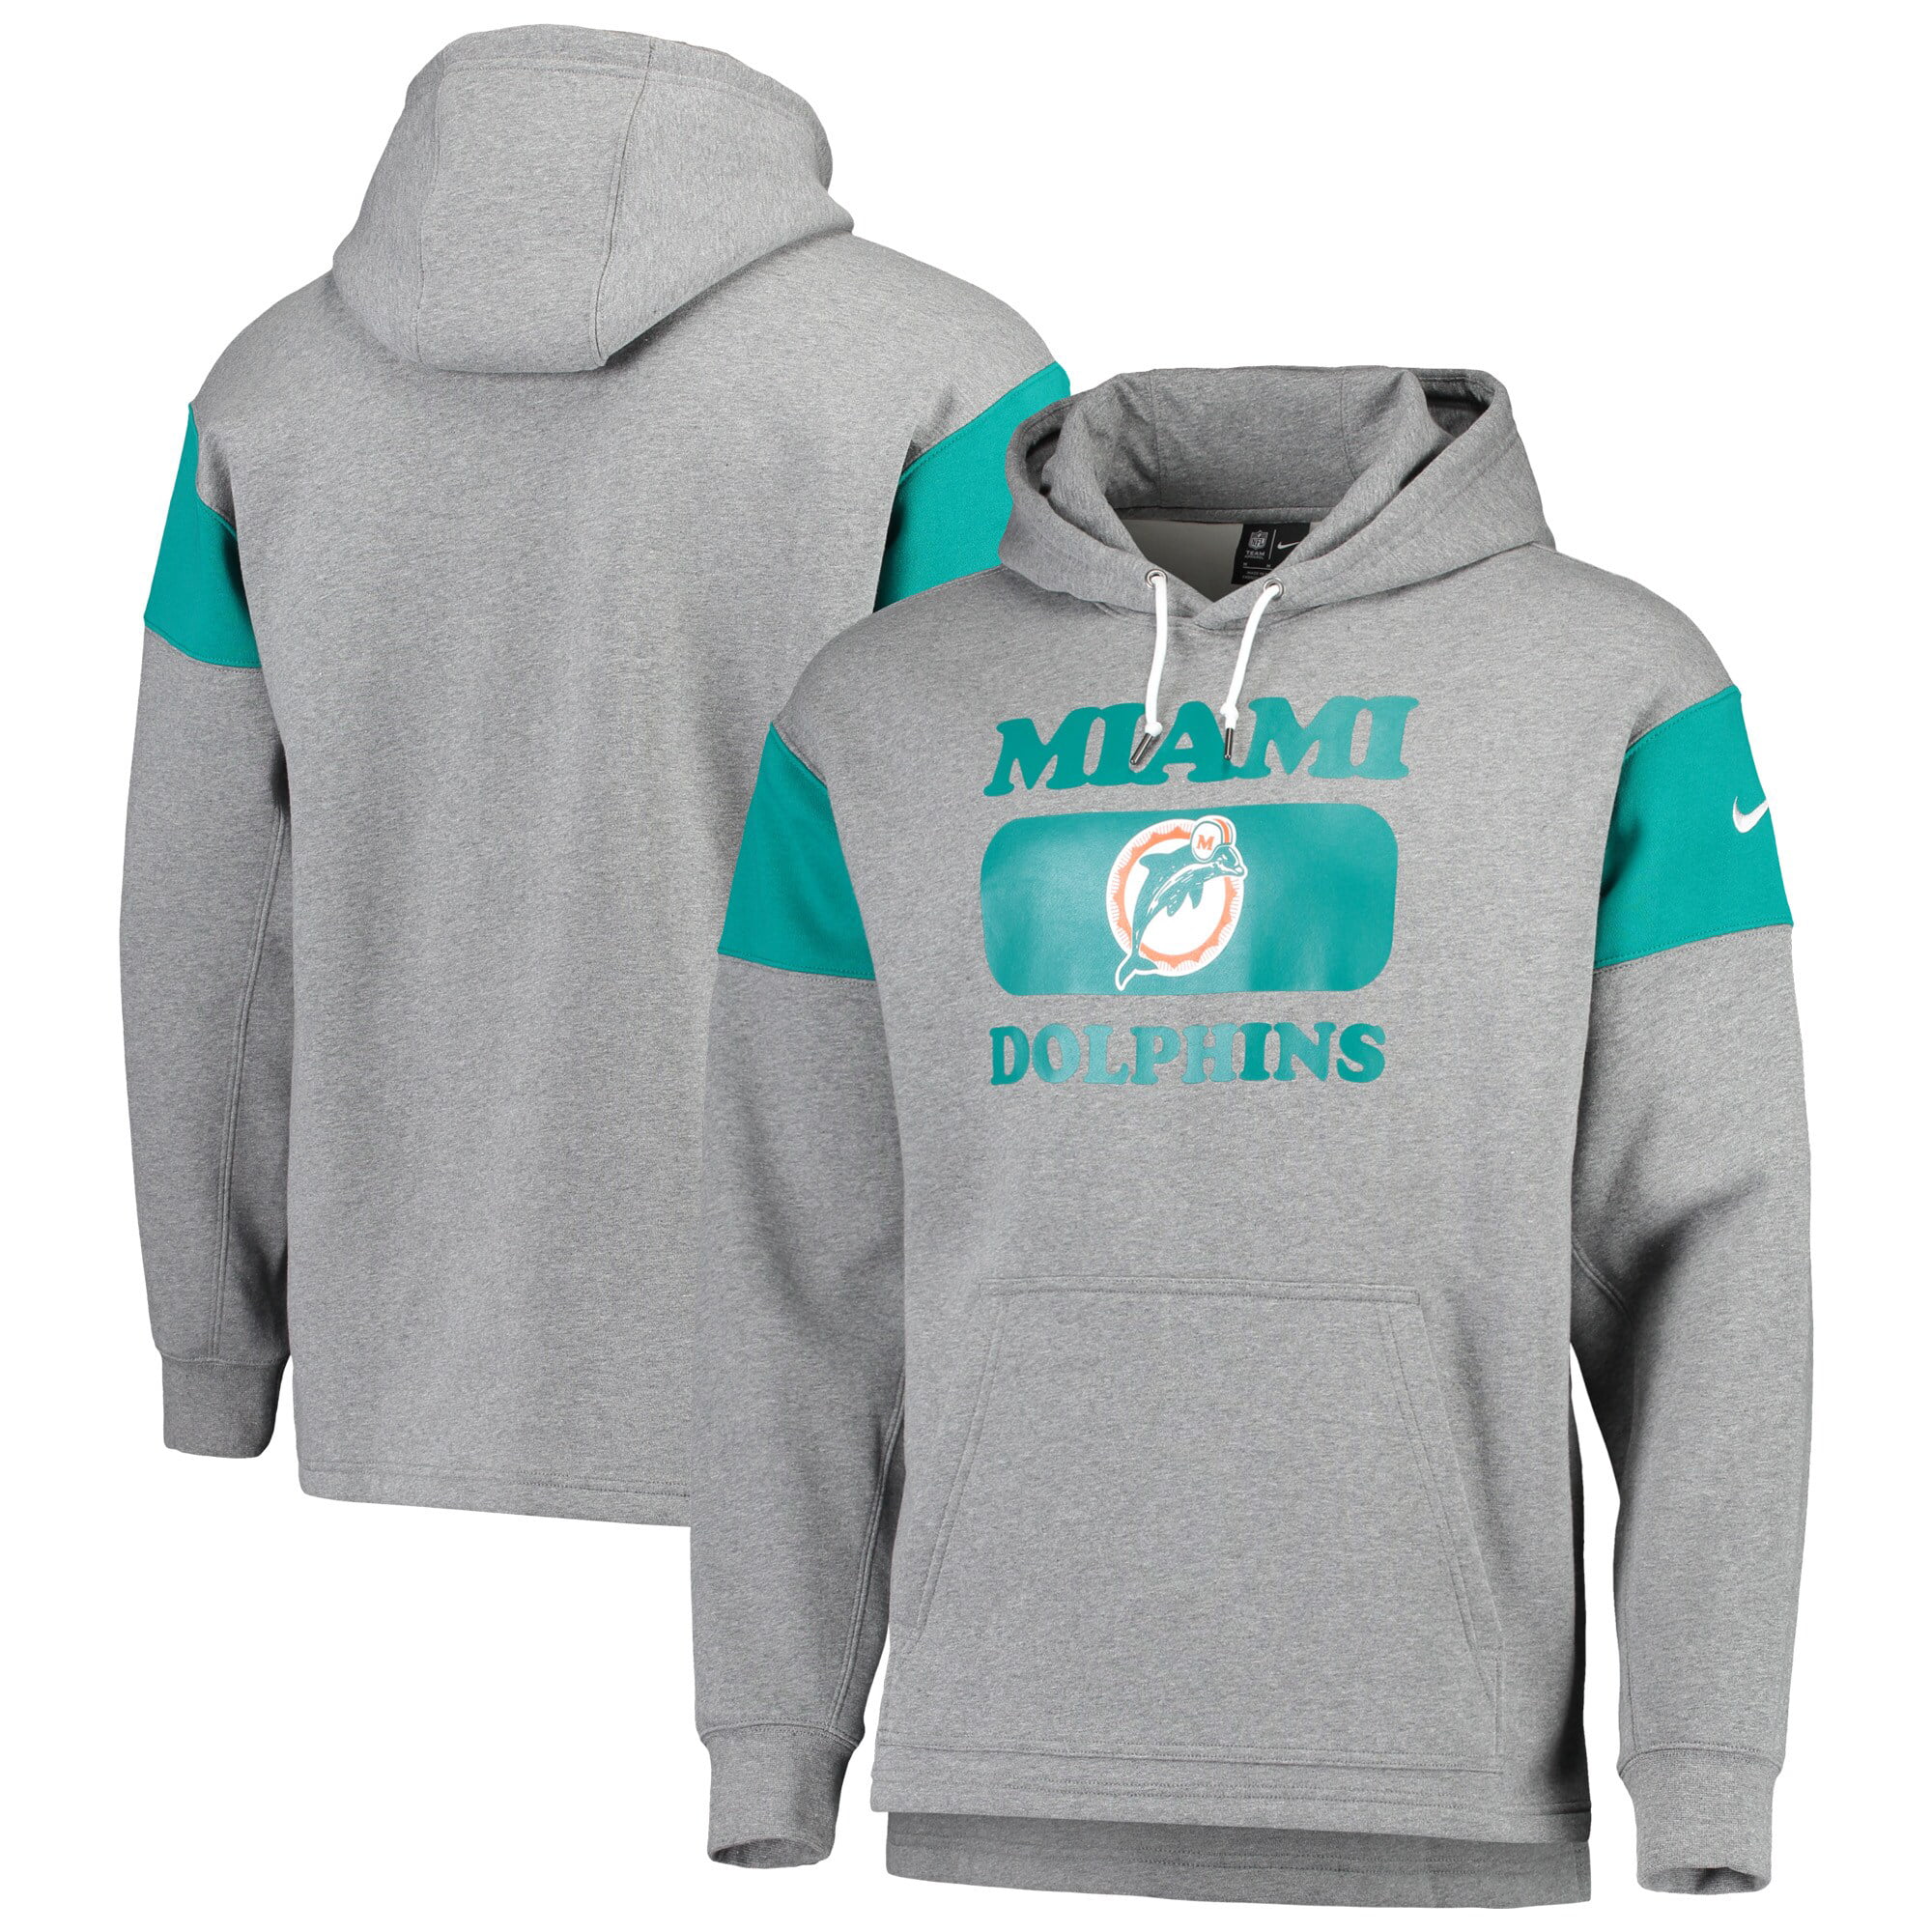 Miami Dolphins Nike Fan Gear Historic Pullover Hoodie - Heathered Gray ...